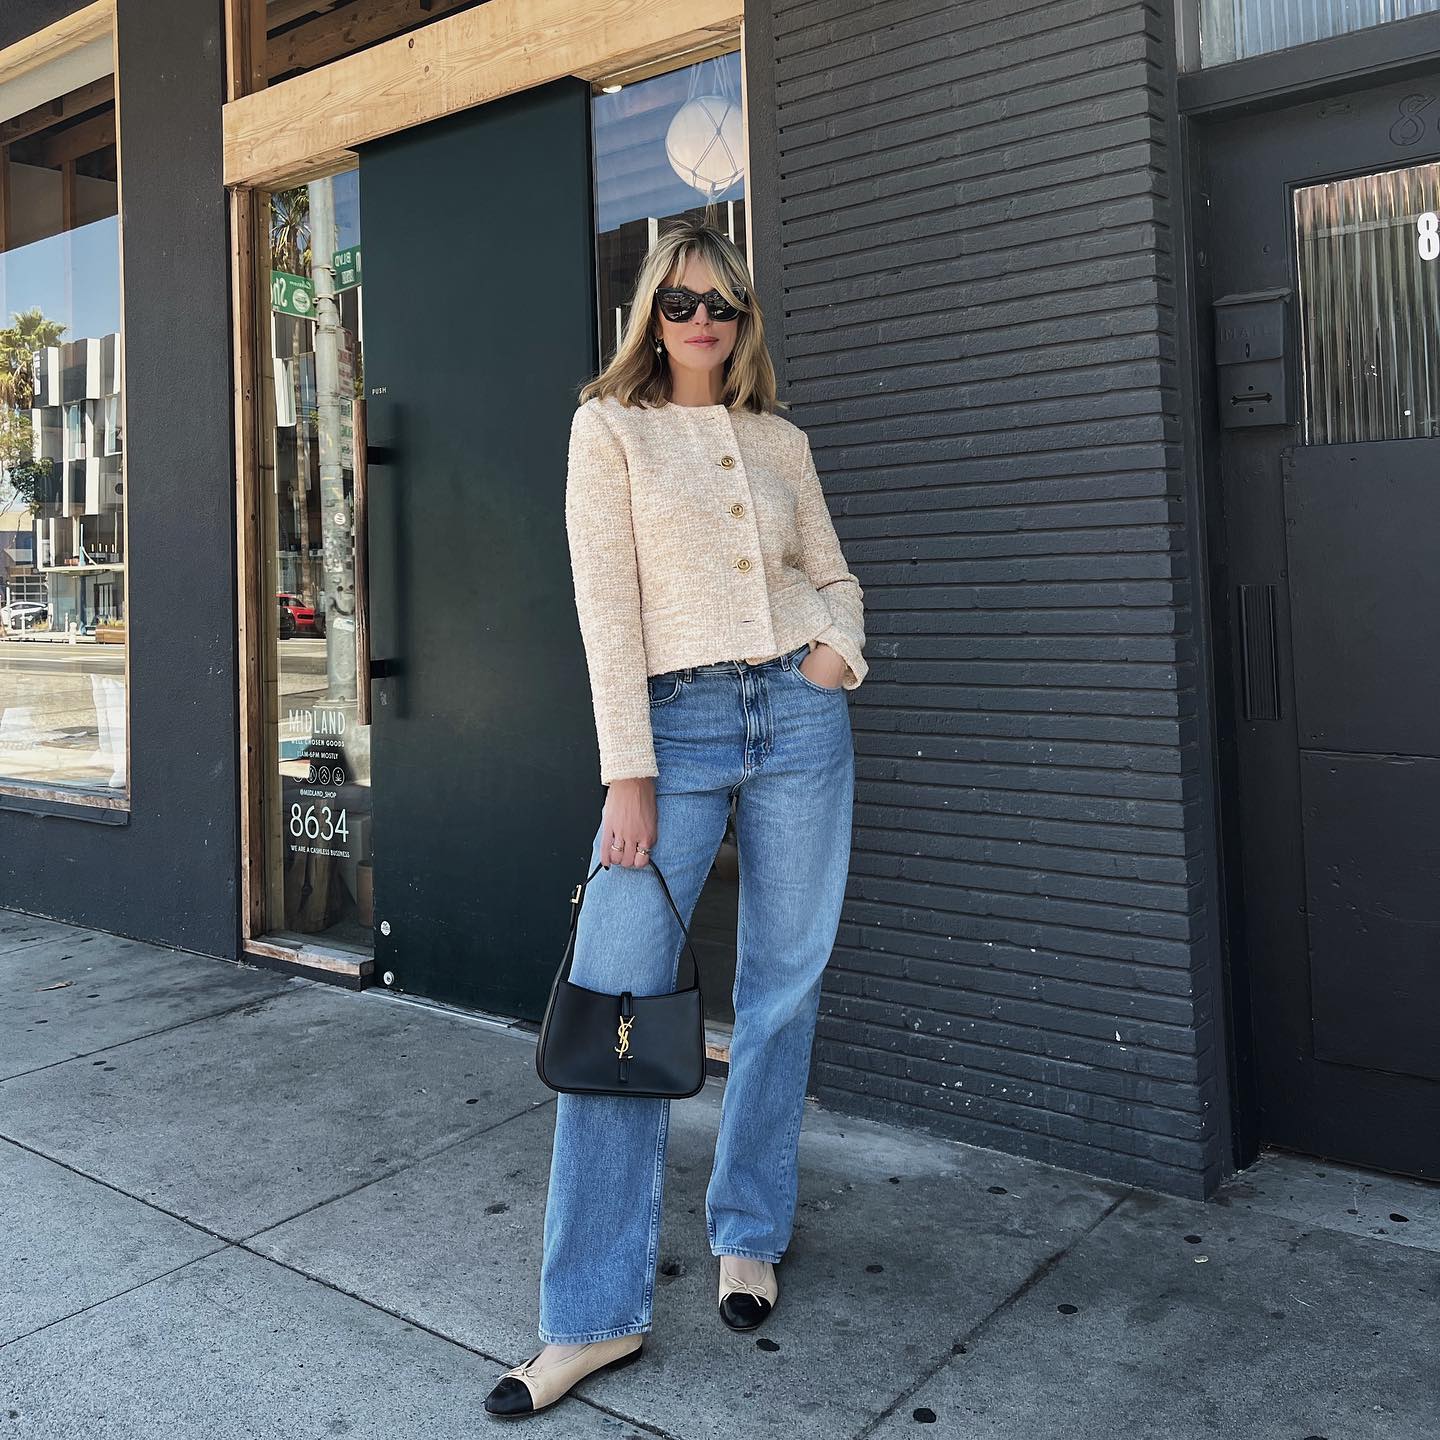 The Trends That Will and Won't Work for Minimalist Style | Who What Wear